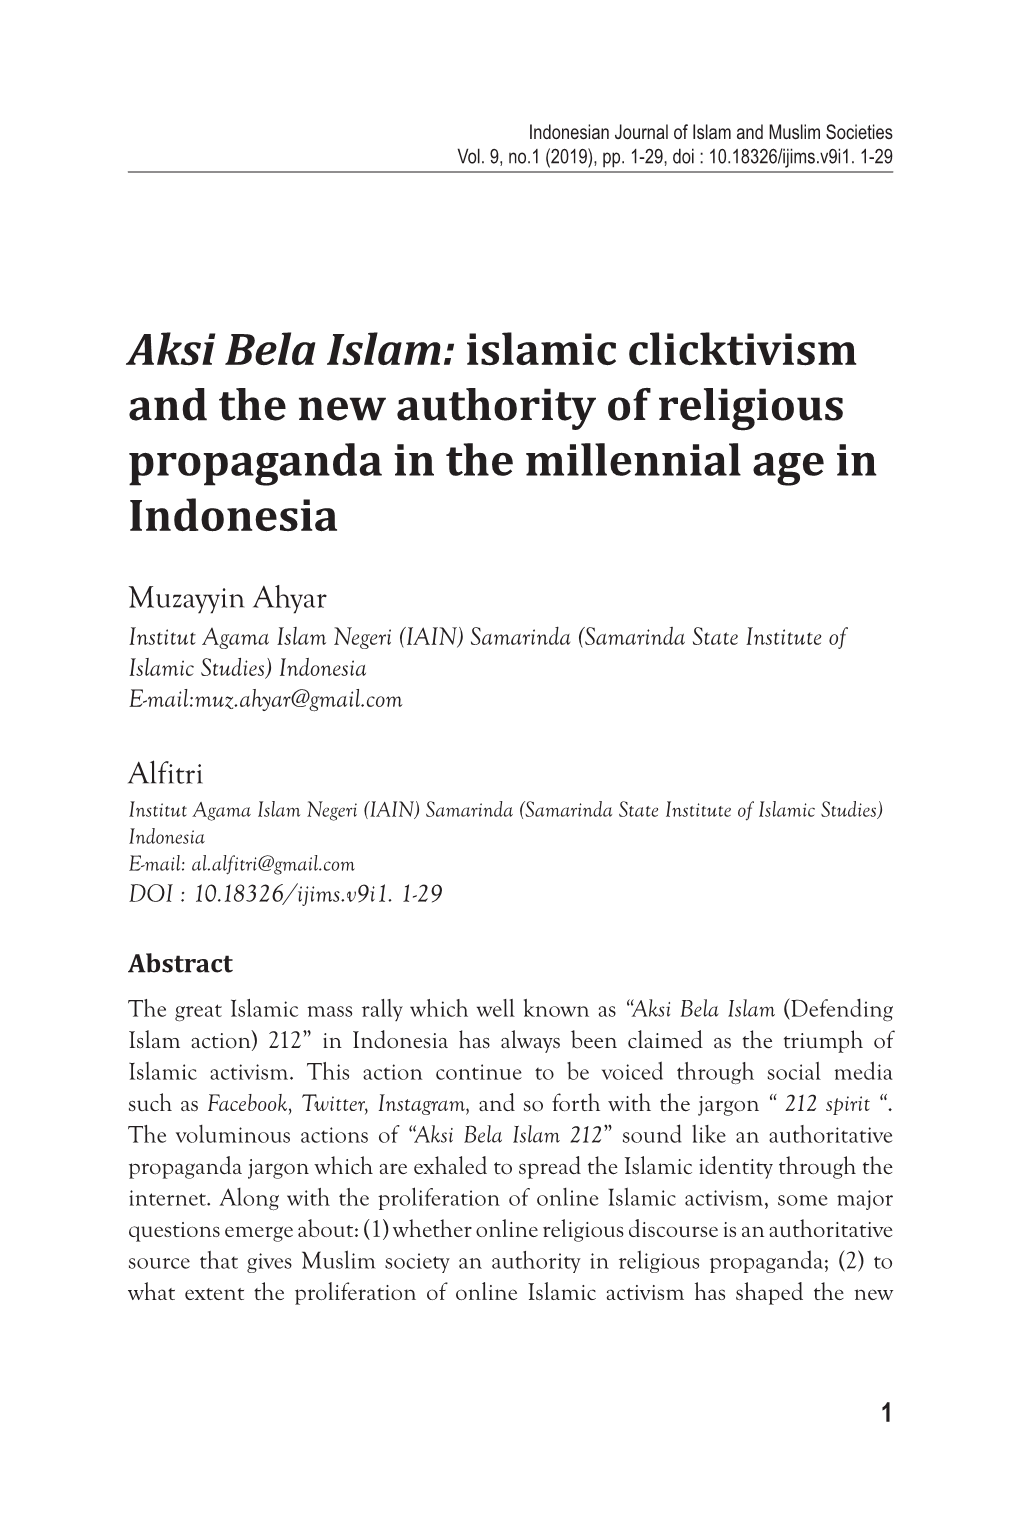 Aksi Bela Islam: Islamic Clicktivism and the New Authority of Religious Propaganda in the Millennial Age in Indonesia